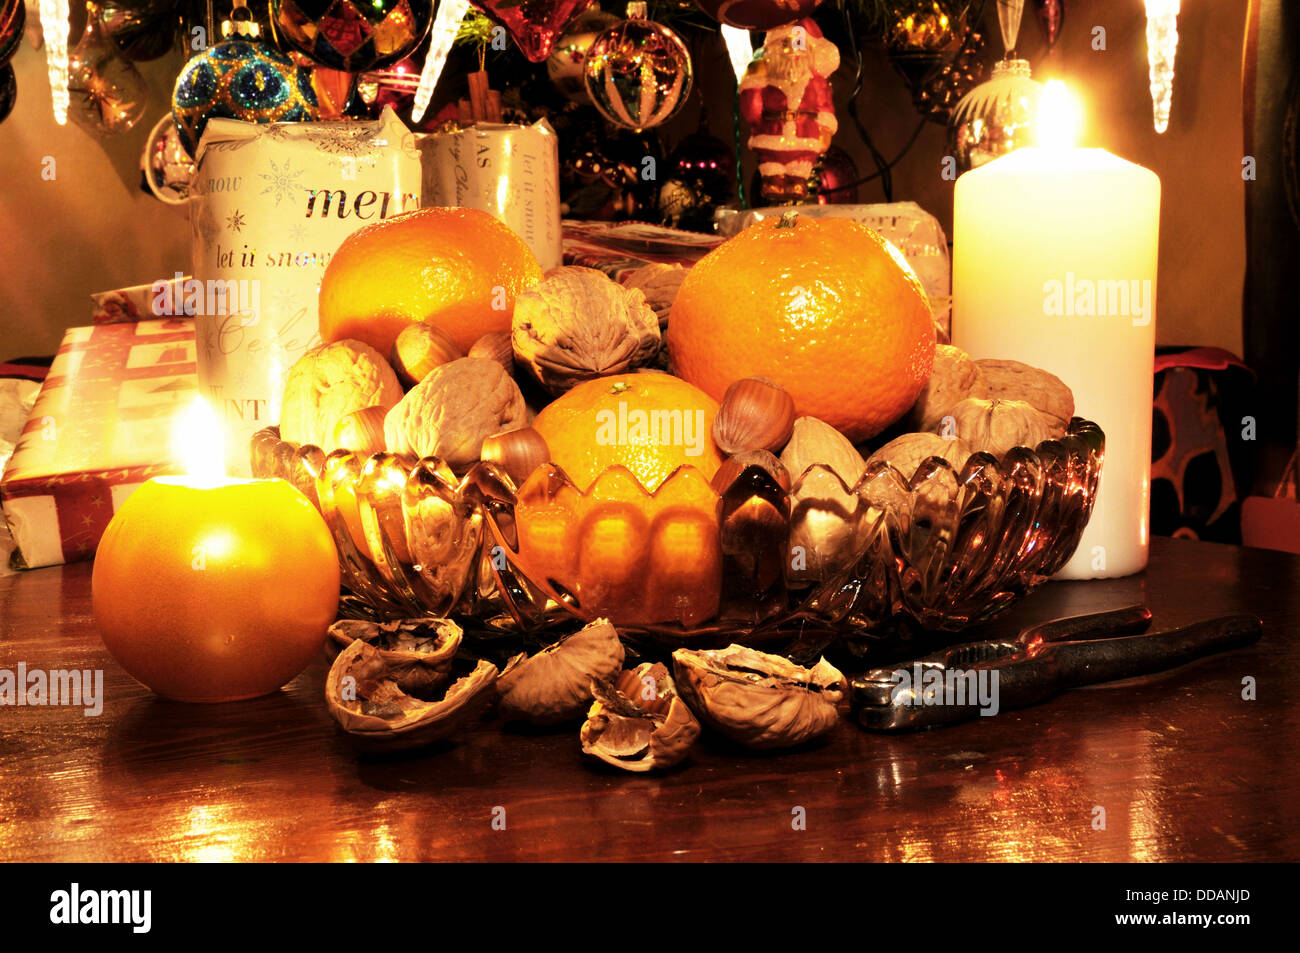 Glass bowl filled with walnuts, hazelnuts and mandarin oranges with Christmas presents under tree to the rear. Stock Photo